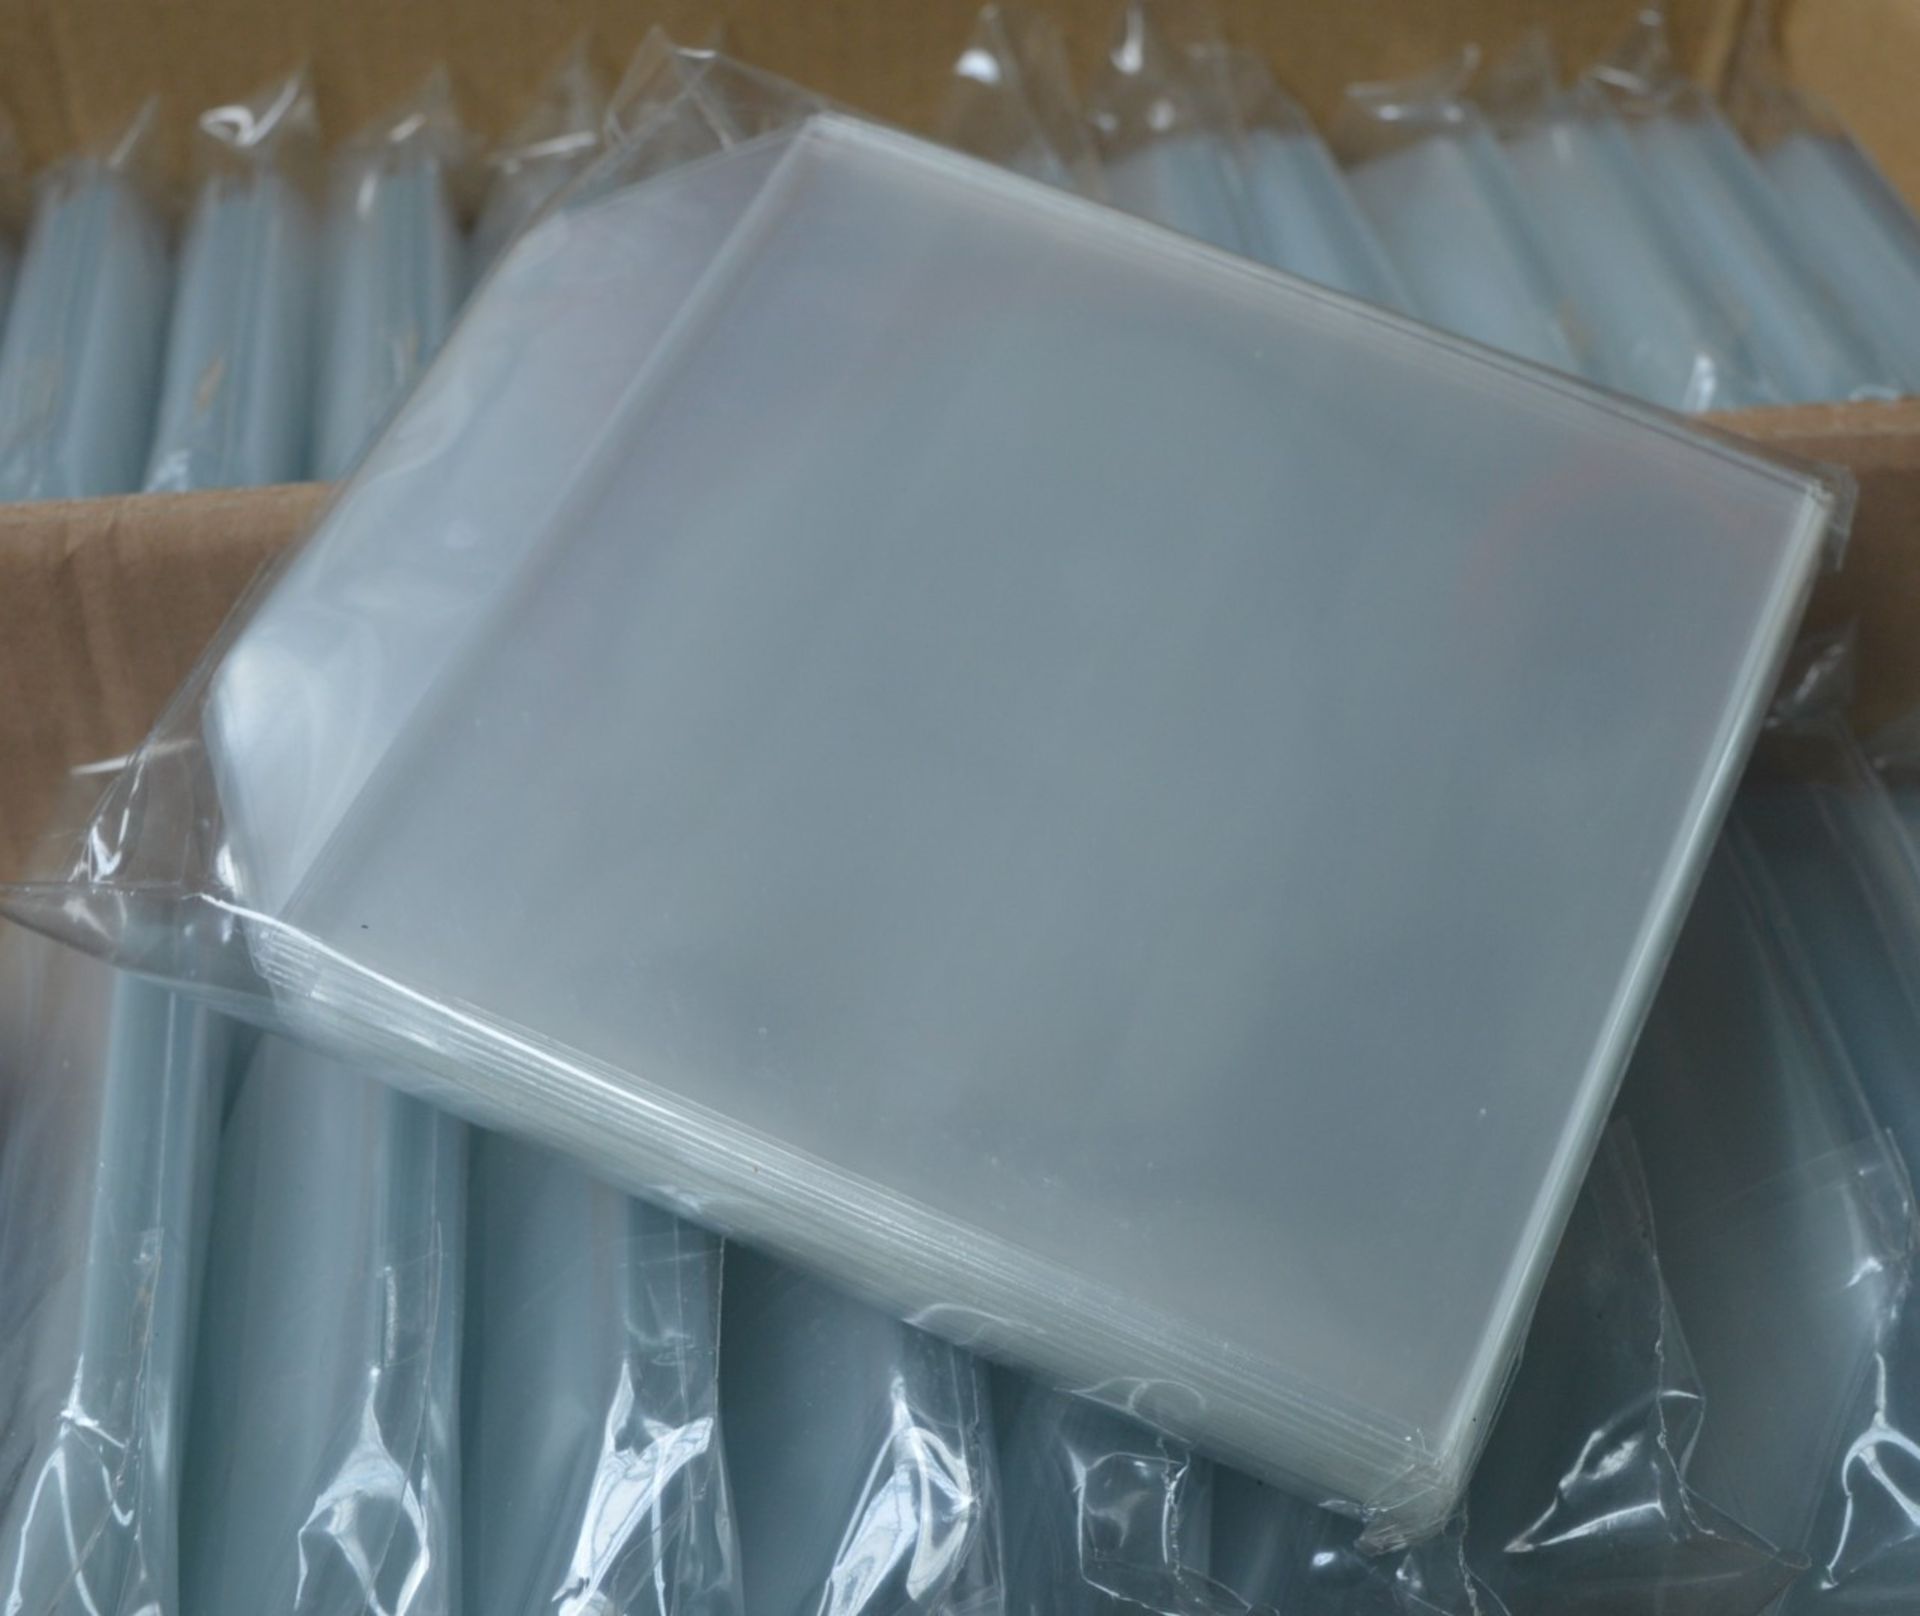 800 x Clear Plastic CD or DVD Sleeves With Flaps - Includes 8 x Packs of 100 Sleeves - Brand New